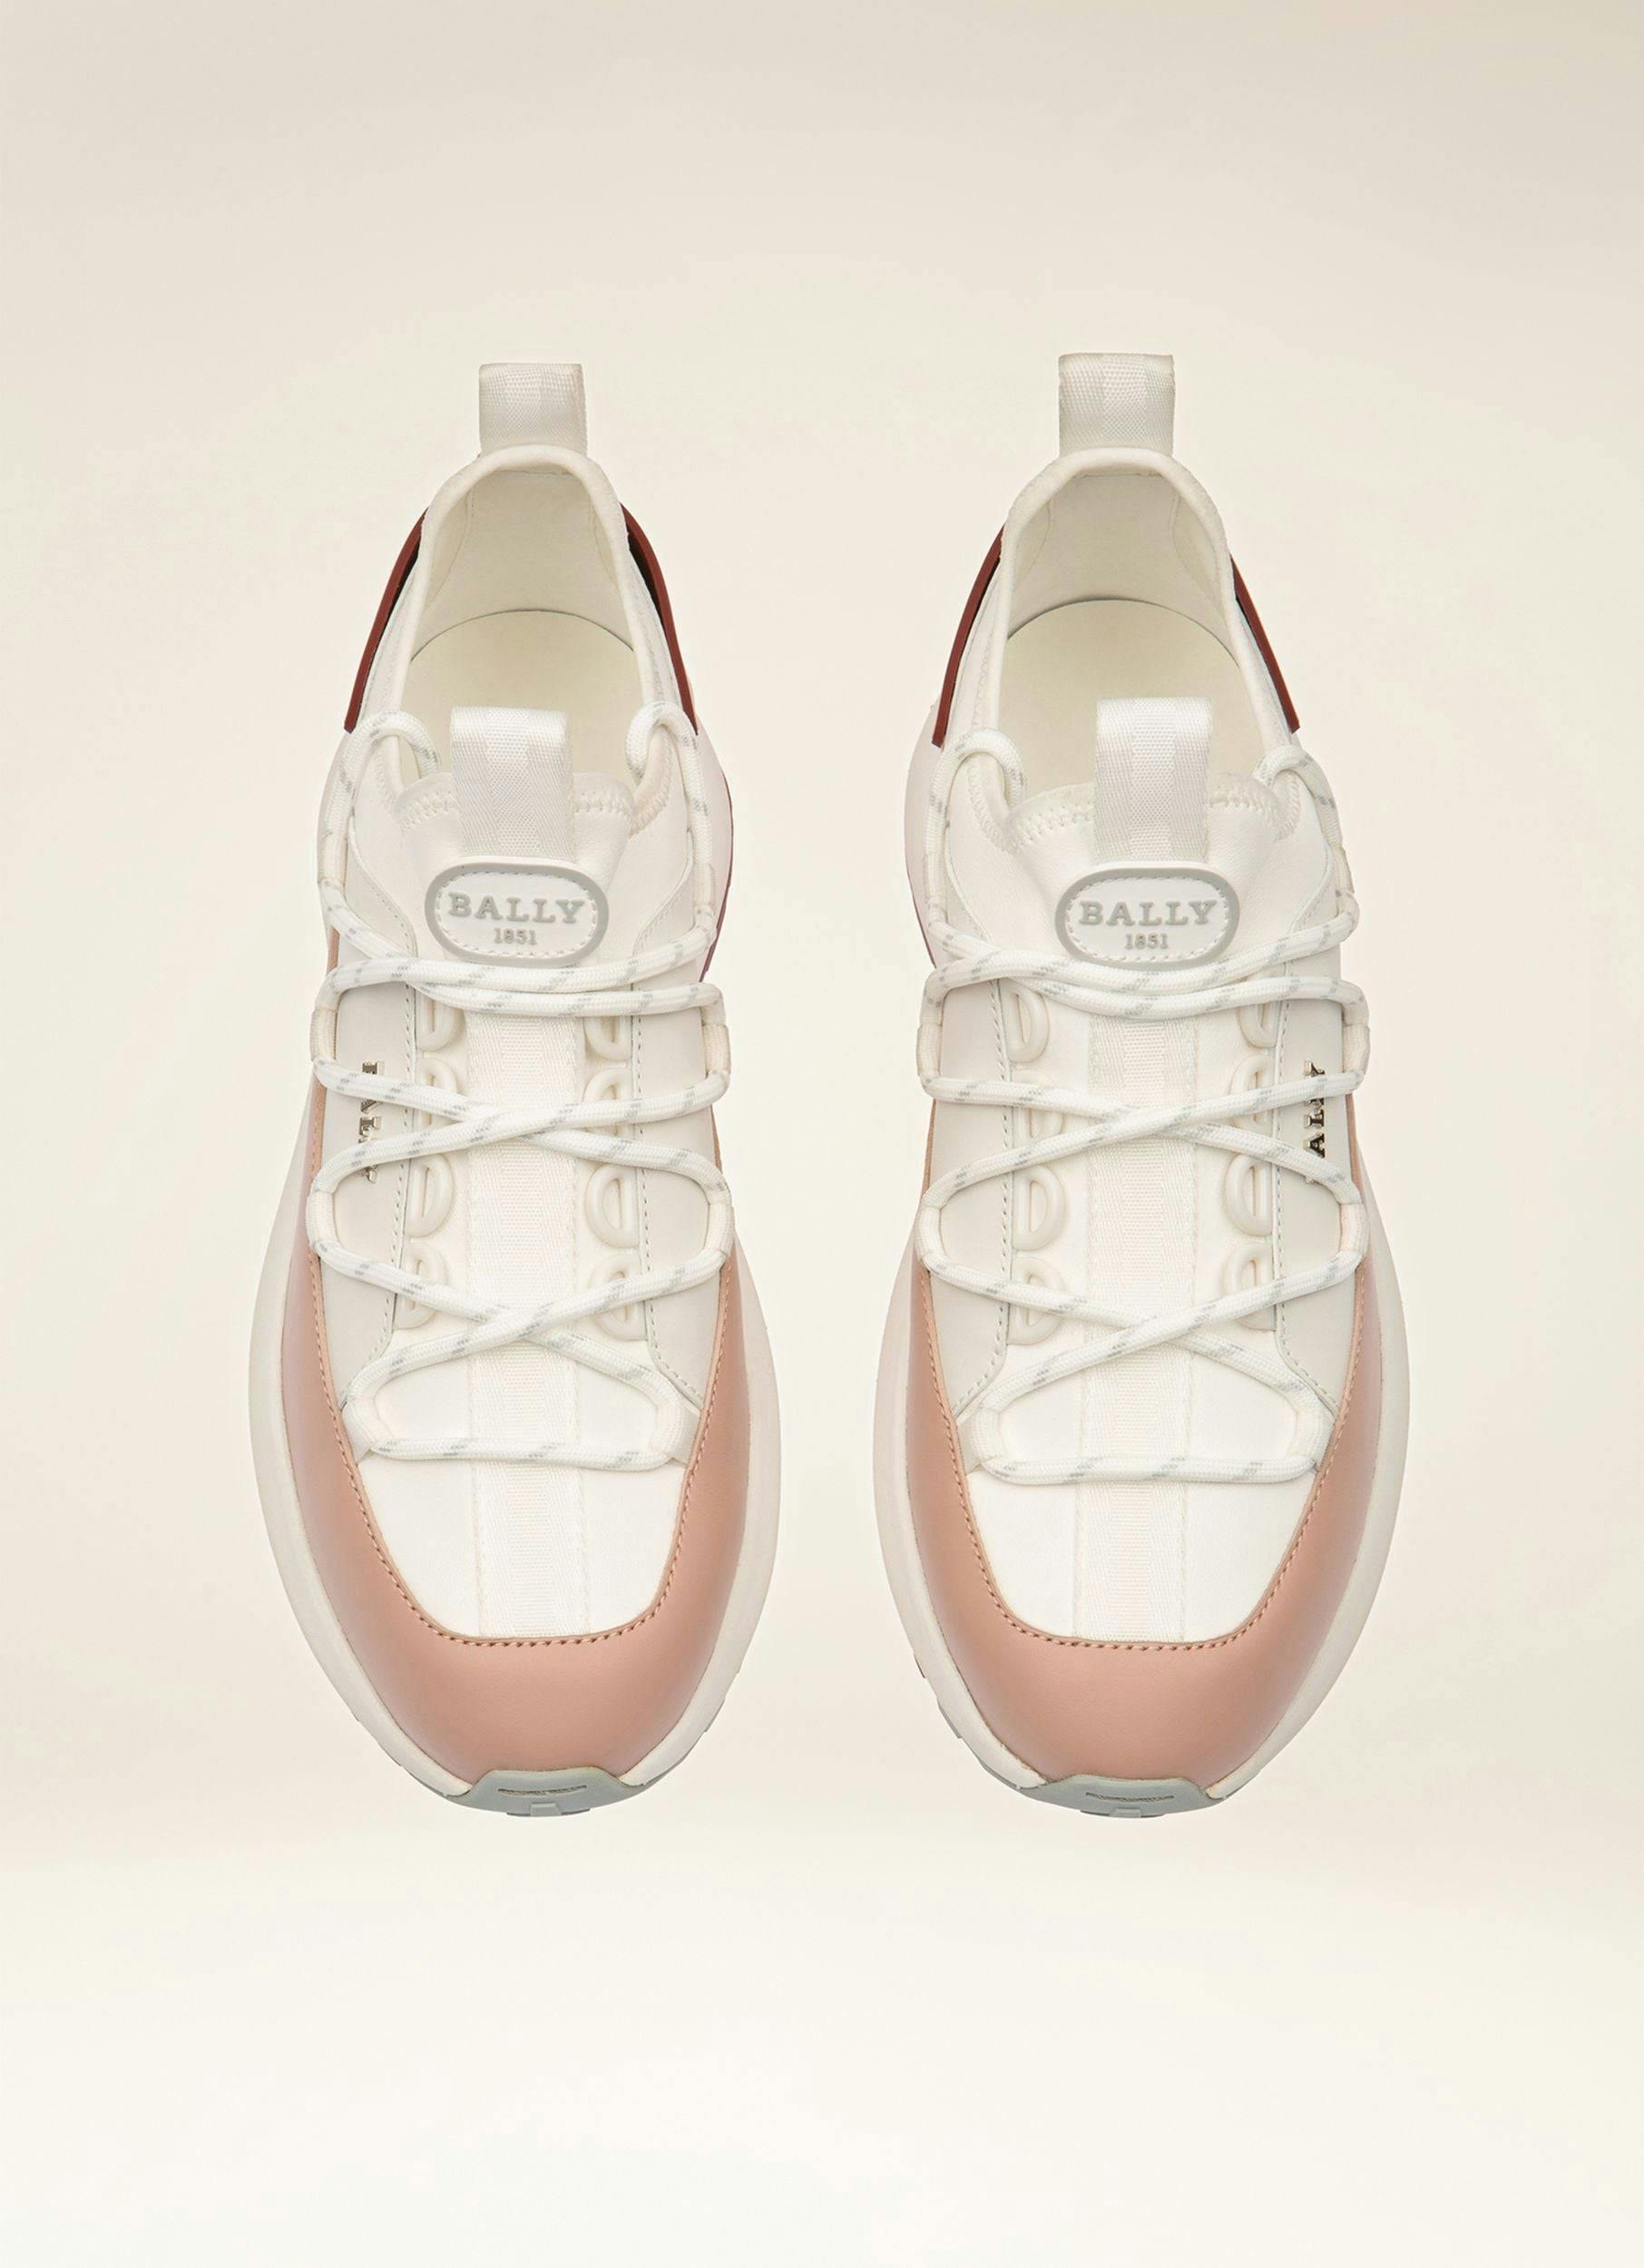 OUTLINE Leather Sneakers In White & Pink - Women's - Bally - 04